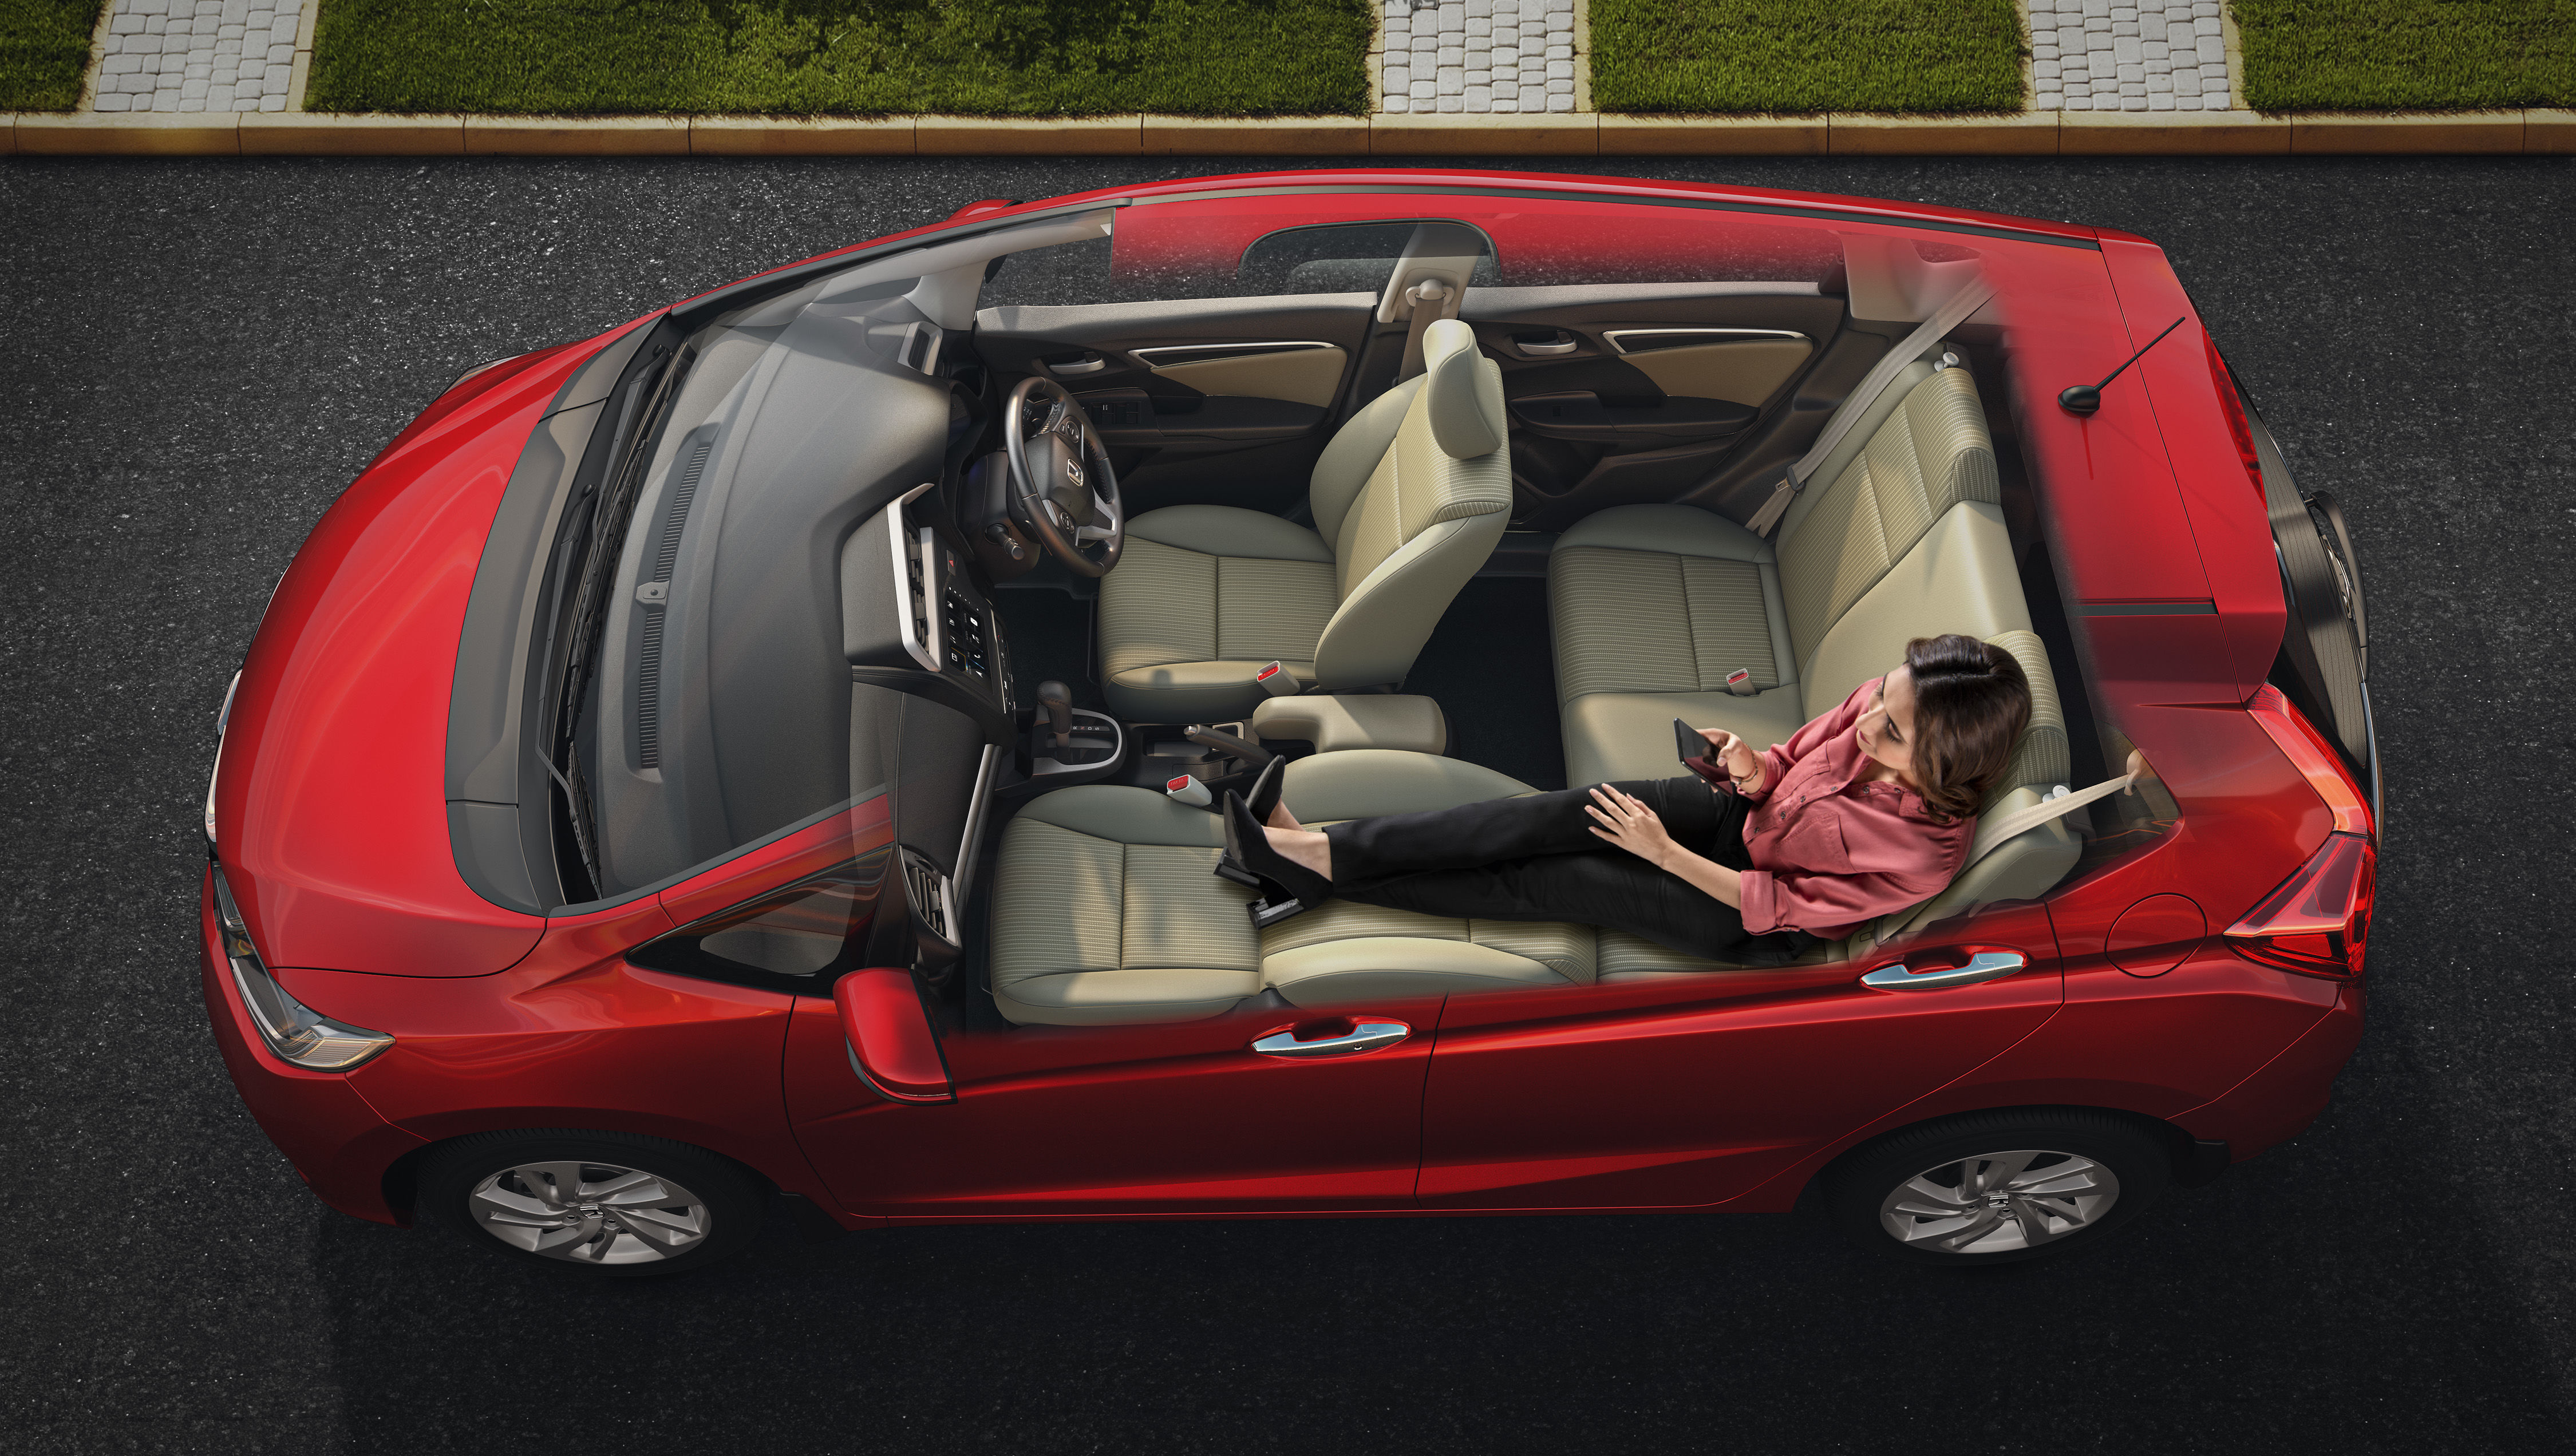 Space promises to continue being the main forte of the new Honda Jazz.